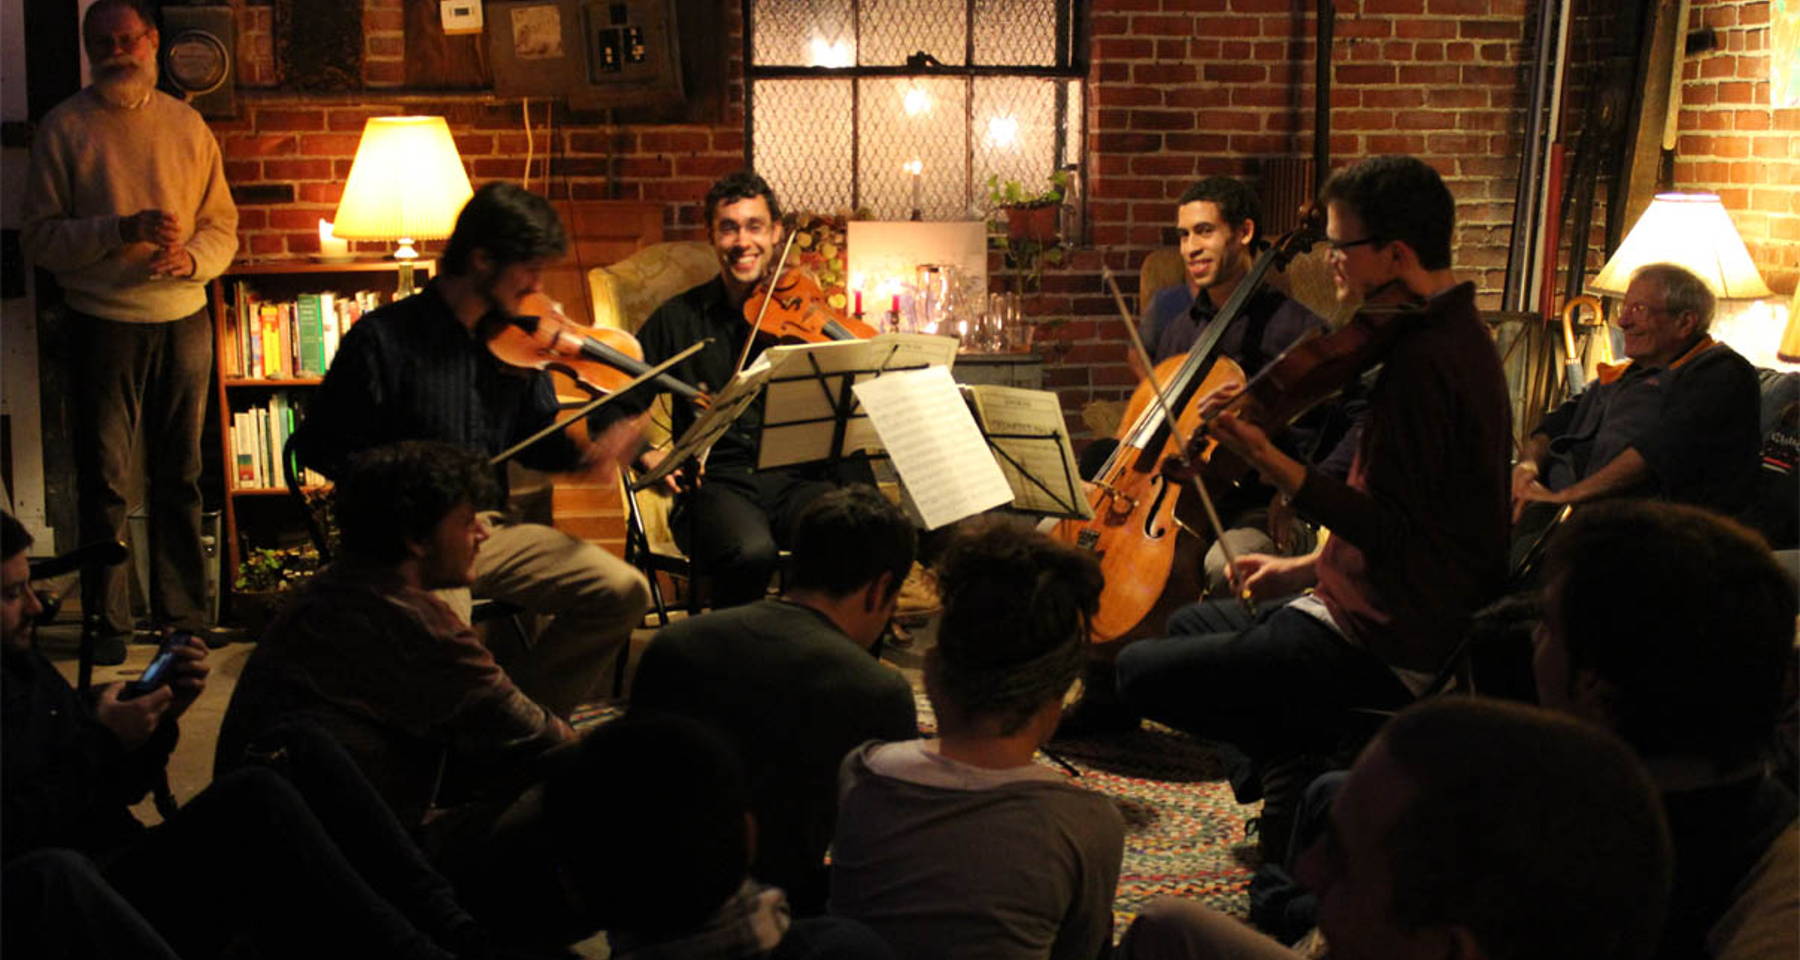 Classical music in a historic home